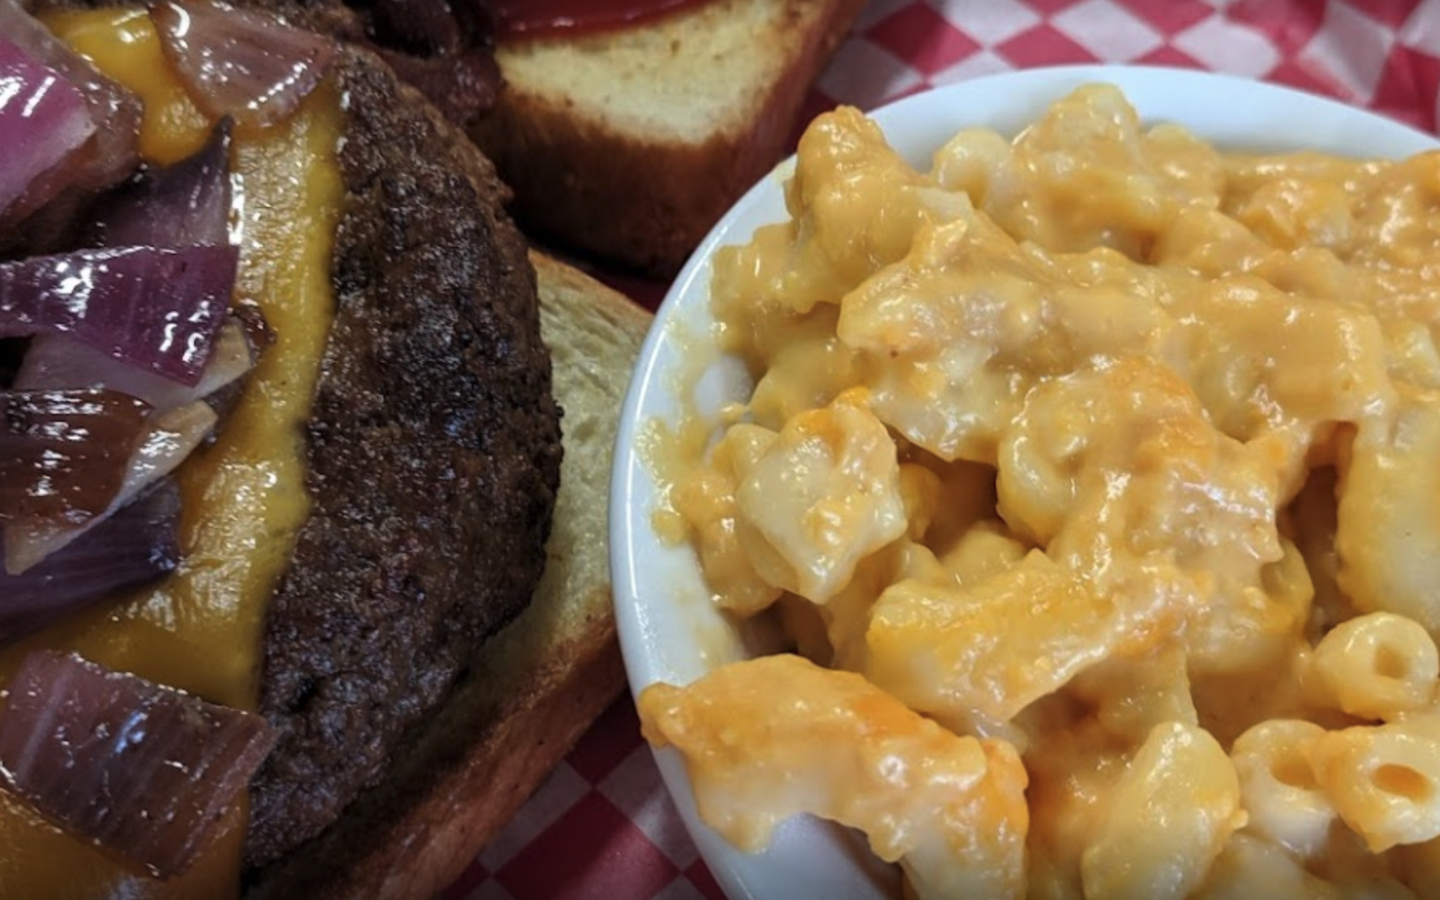 a cheeseburger topped with purple onions, next to a bowl of homemade Mac and cheese